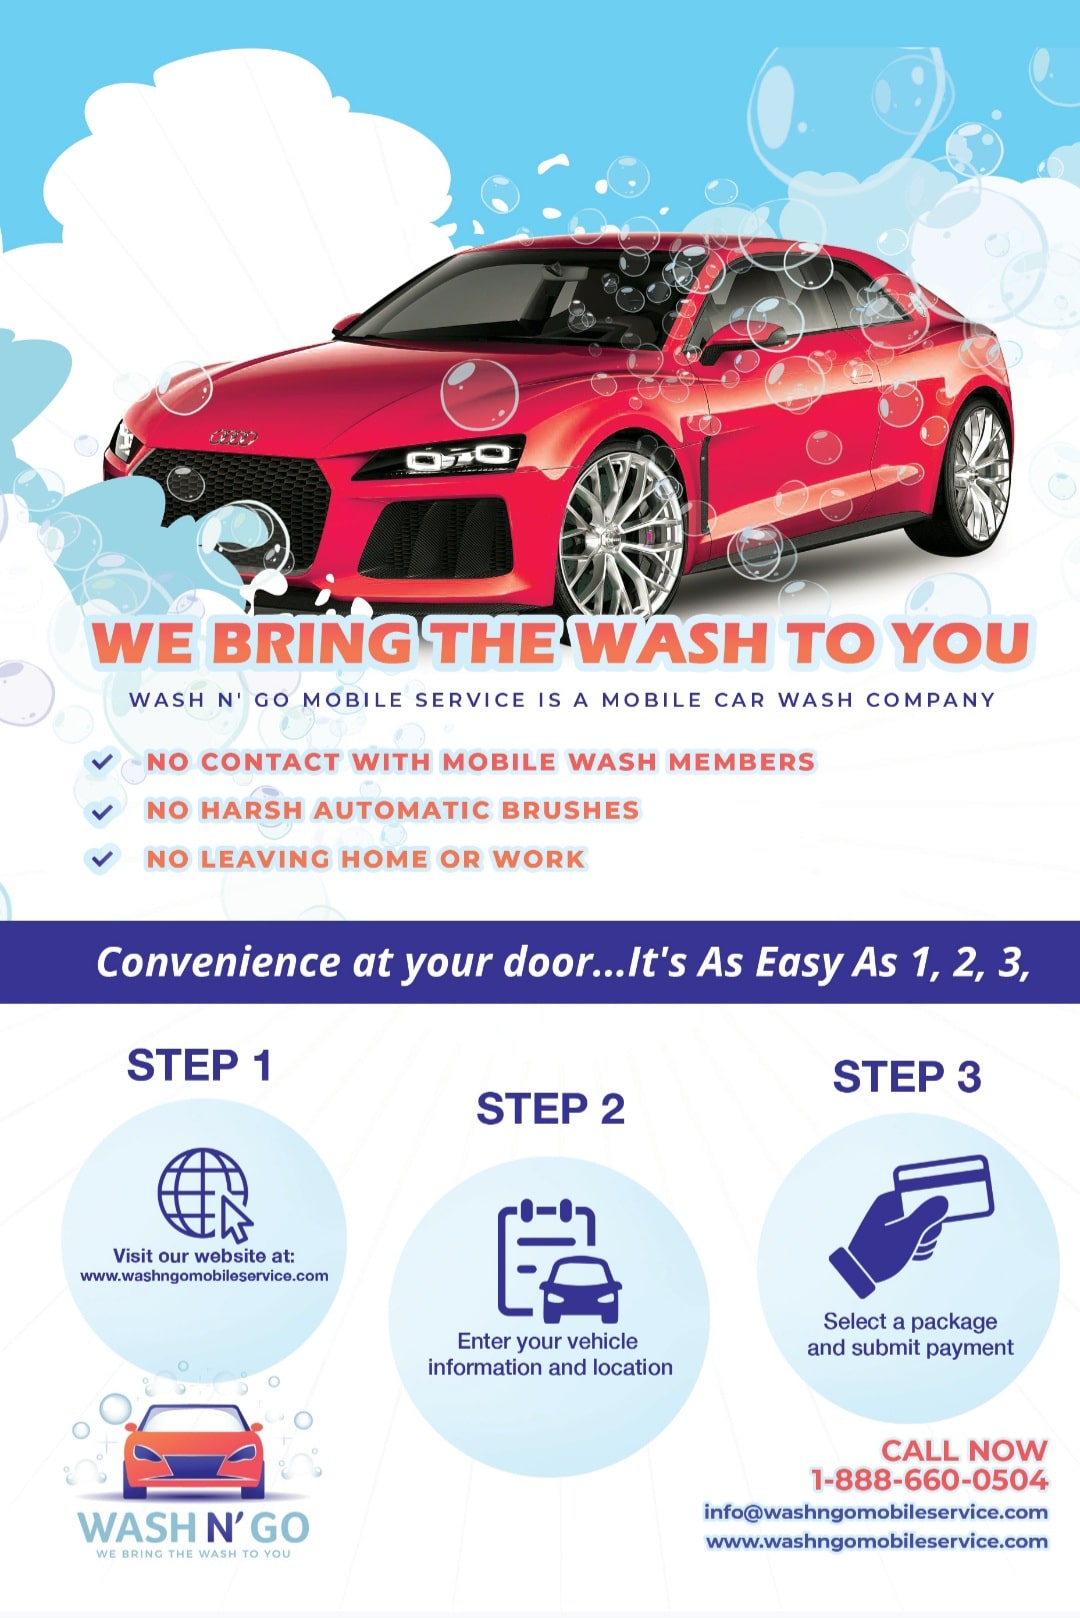 A flyer advertising a car wash service near apartments in The Woodlands, TX.